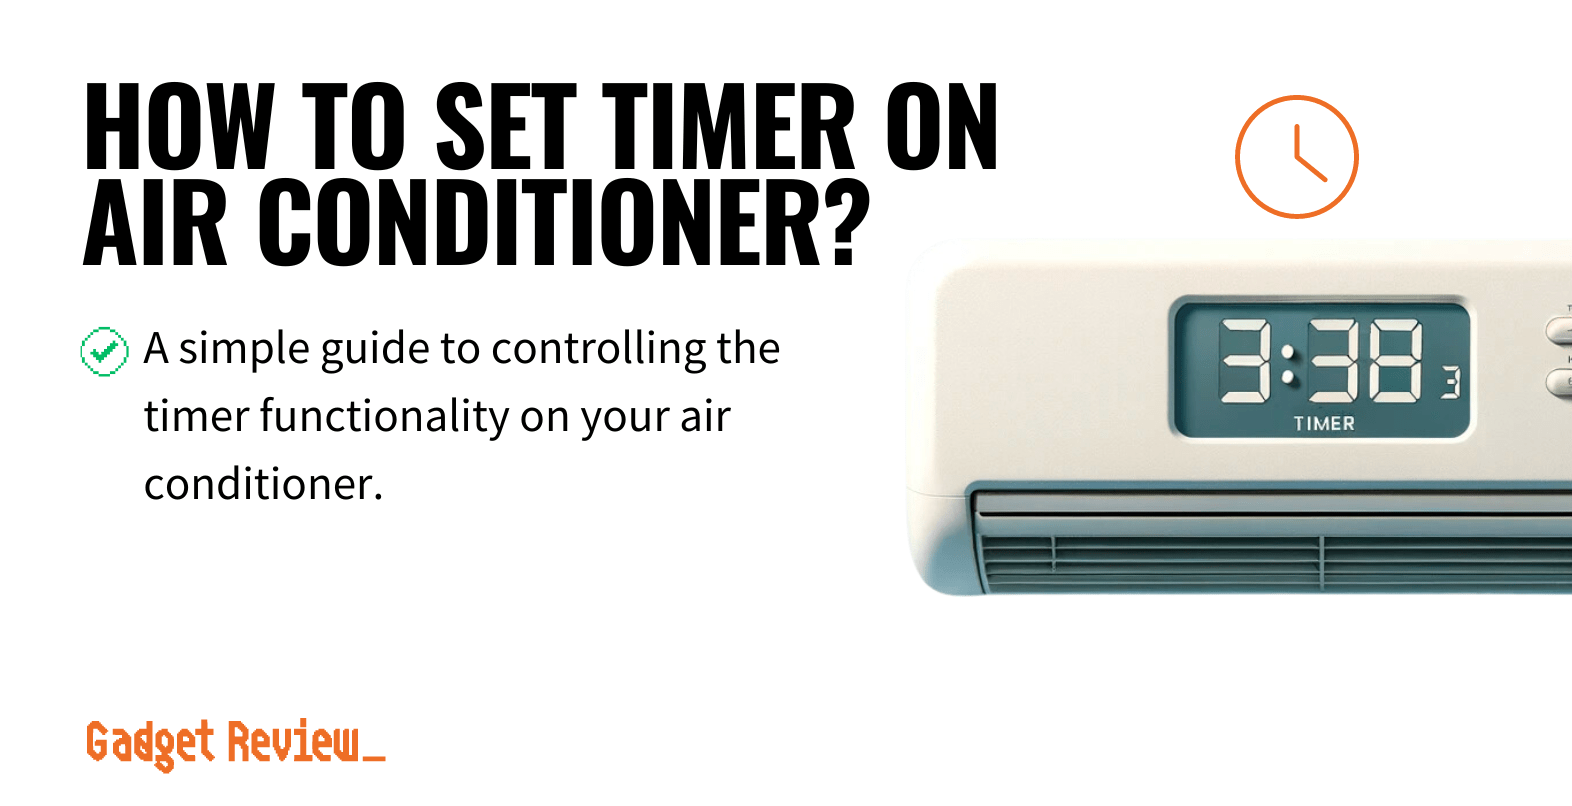 how to set timer on air conditioner guide